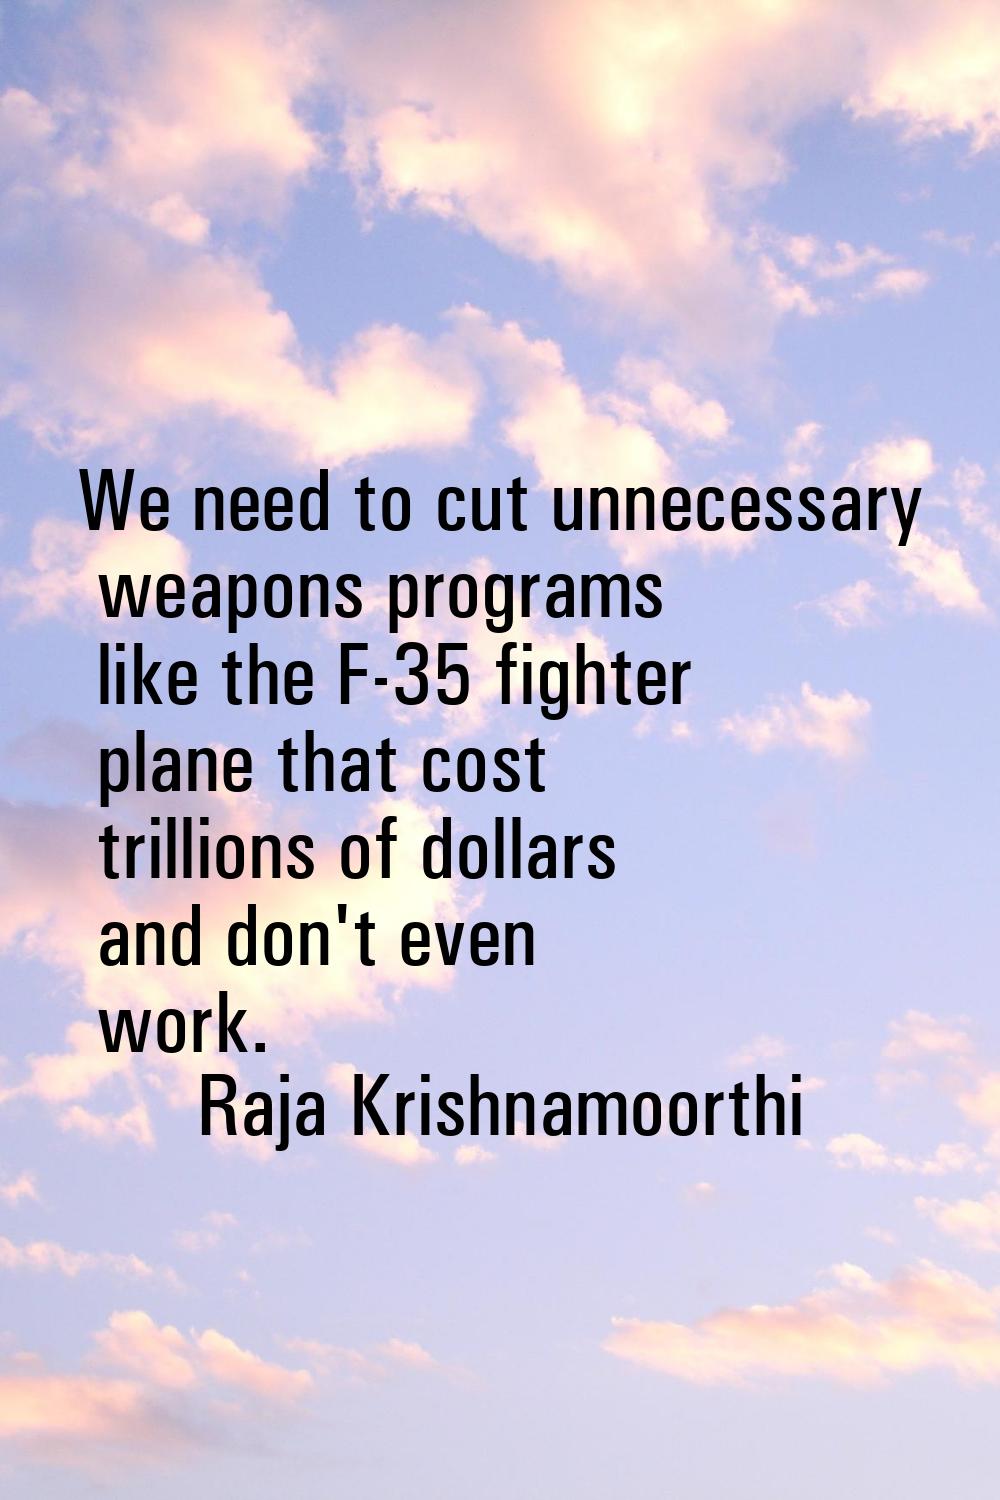 We need to cut unnecessary weapons programs like the F-35 fighter plane that cost trillions of doll